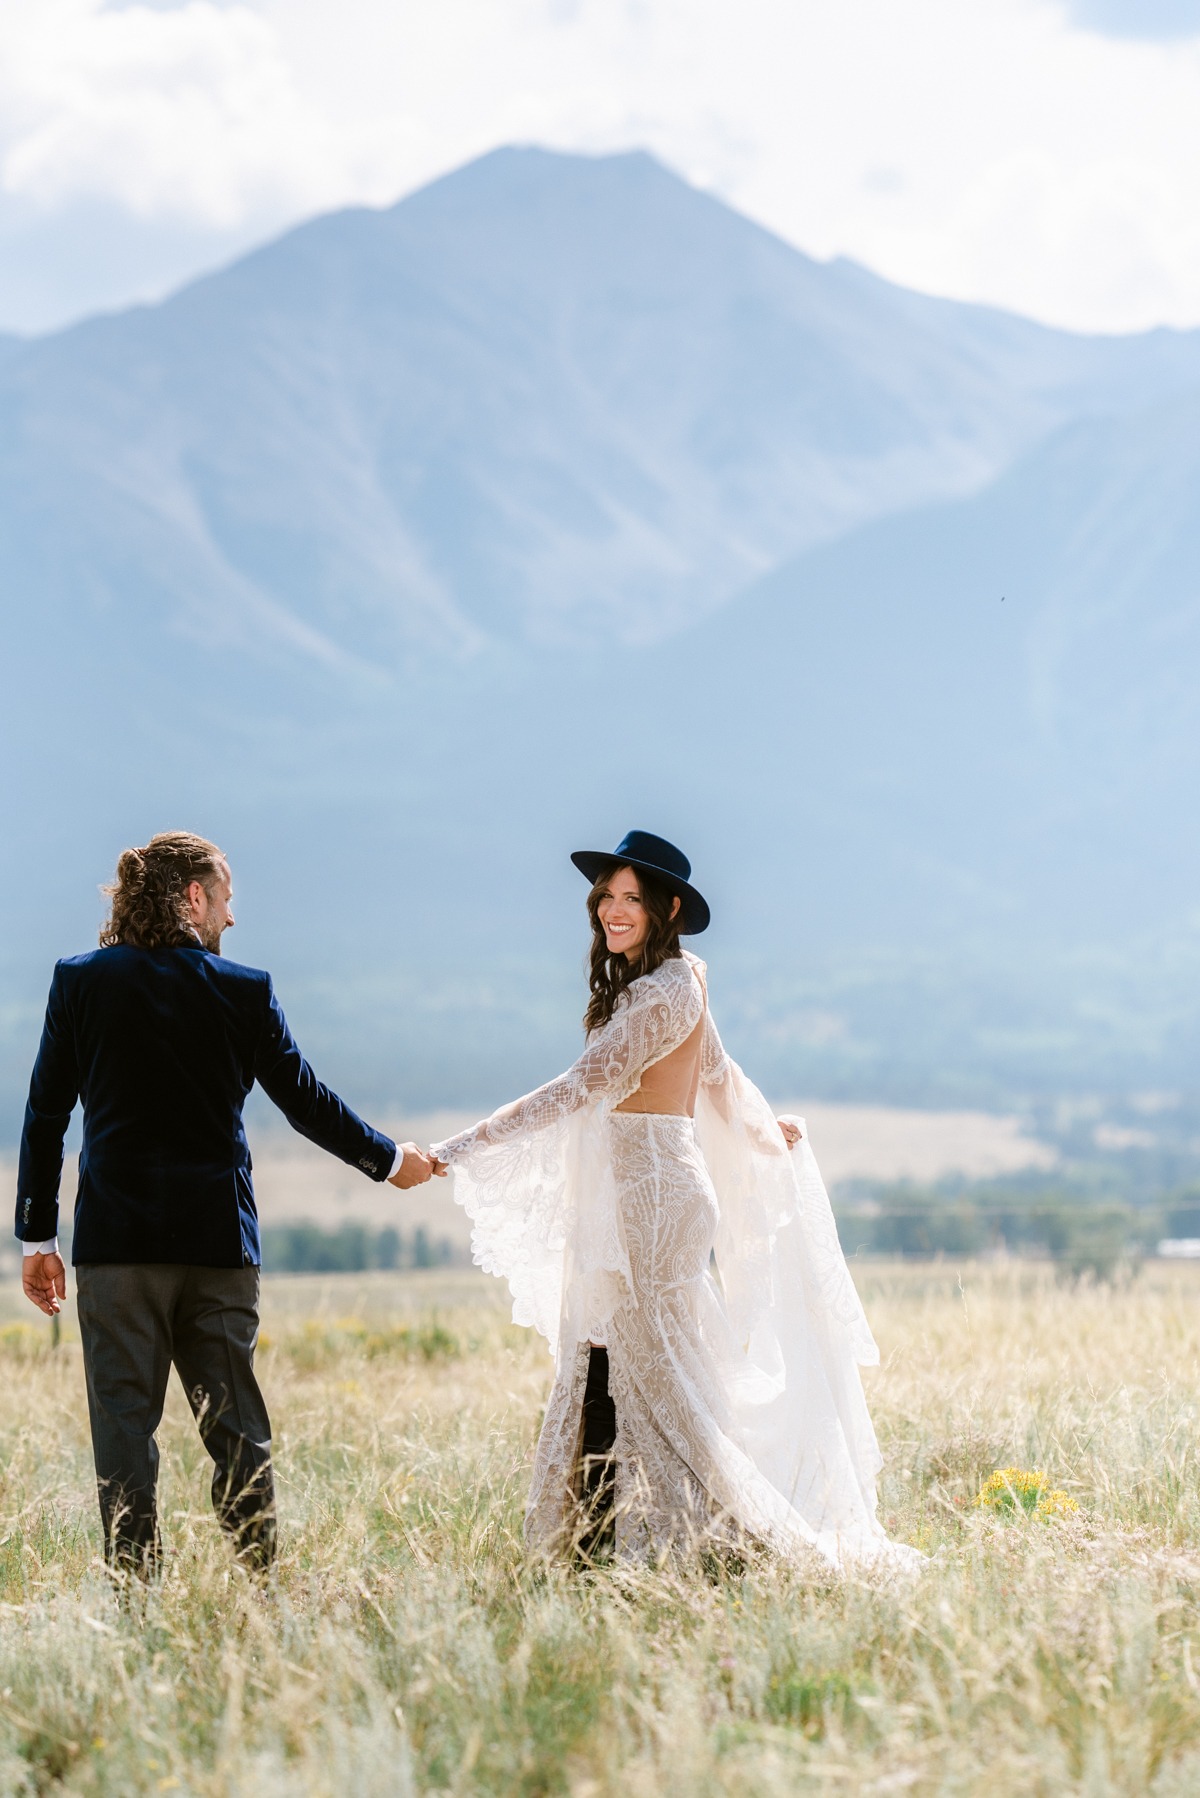 A Chance Meeting At A Concert Led To This Classic Rock-Inspired Wedding In Colorado